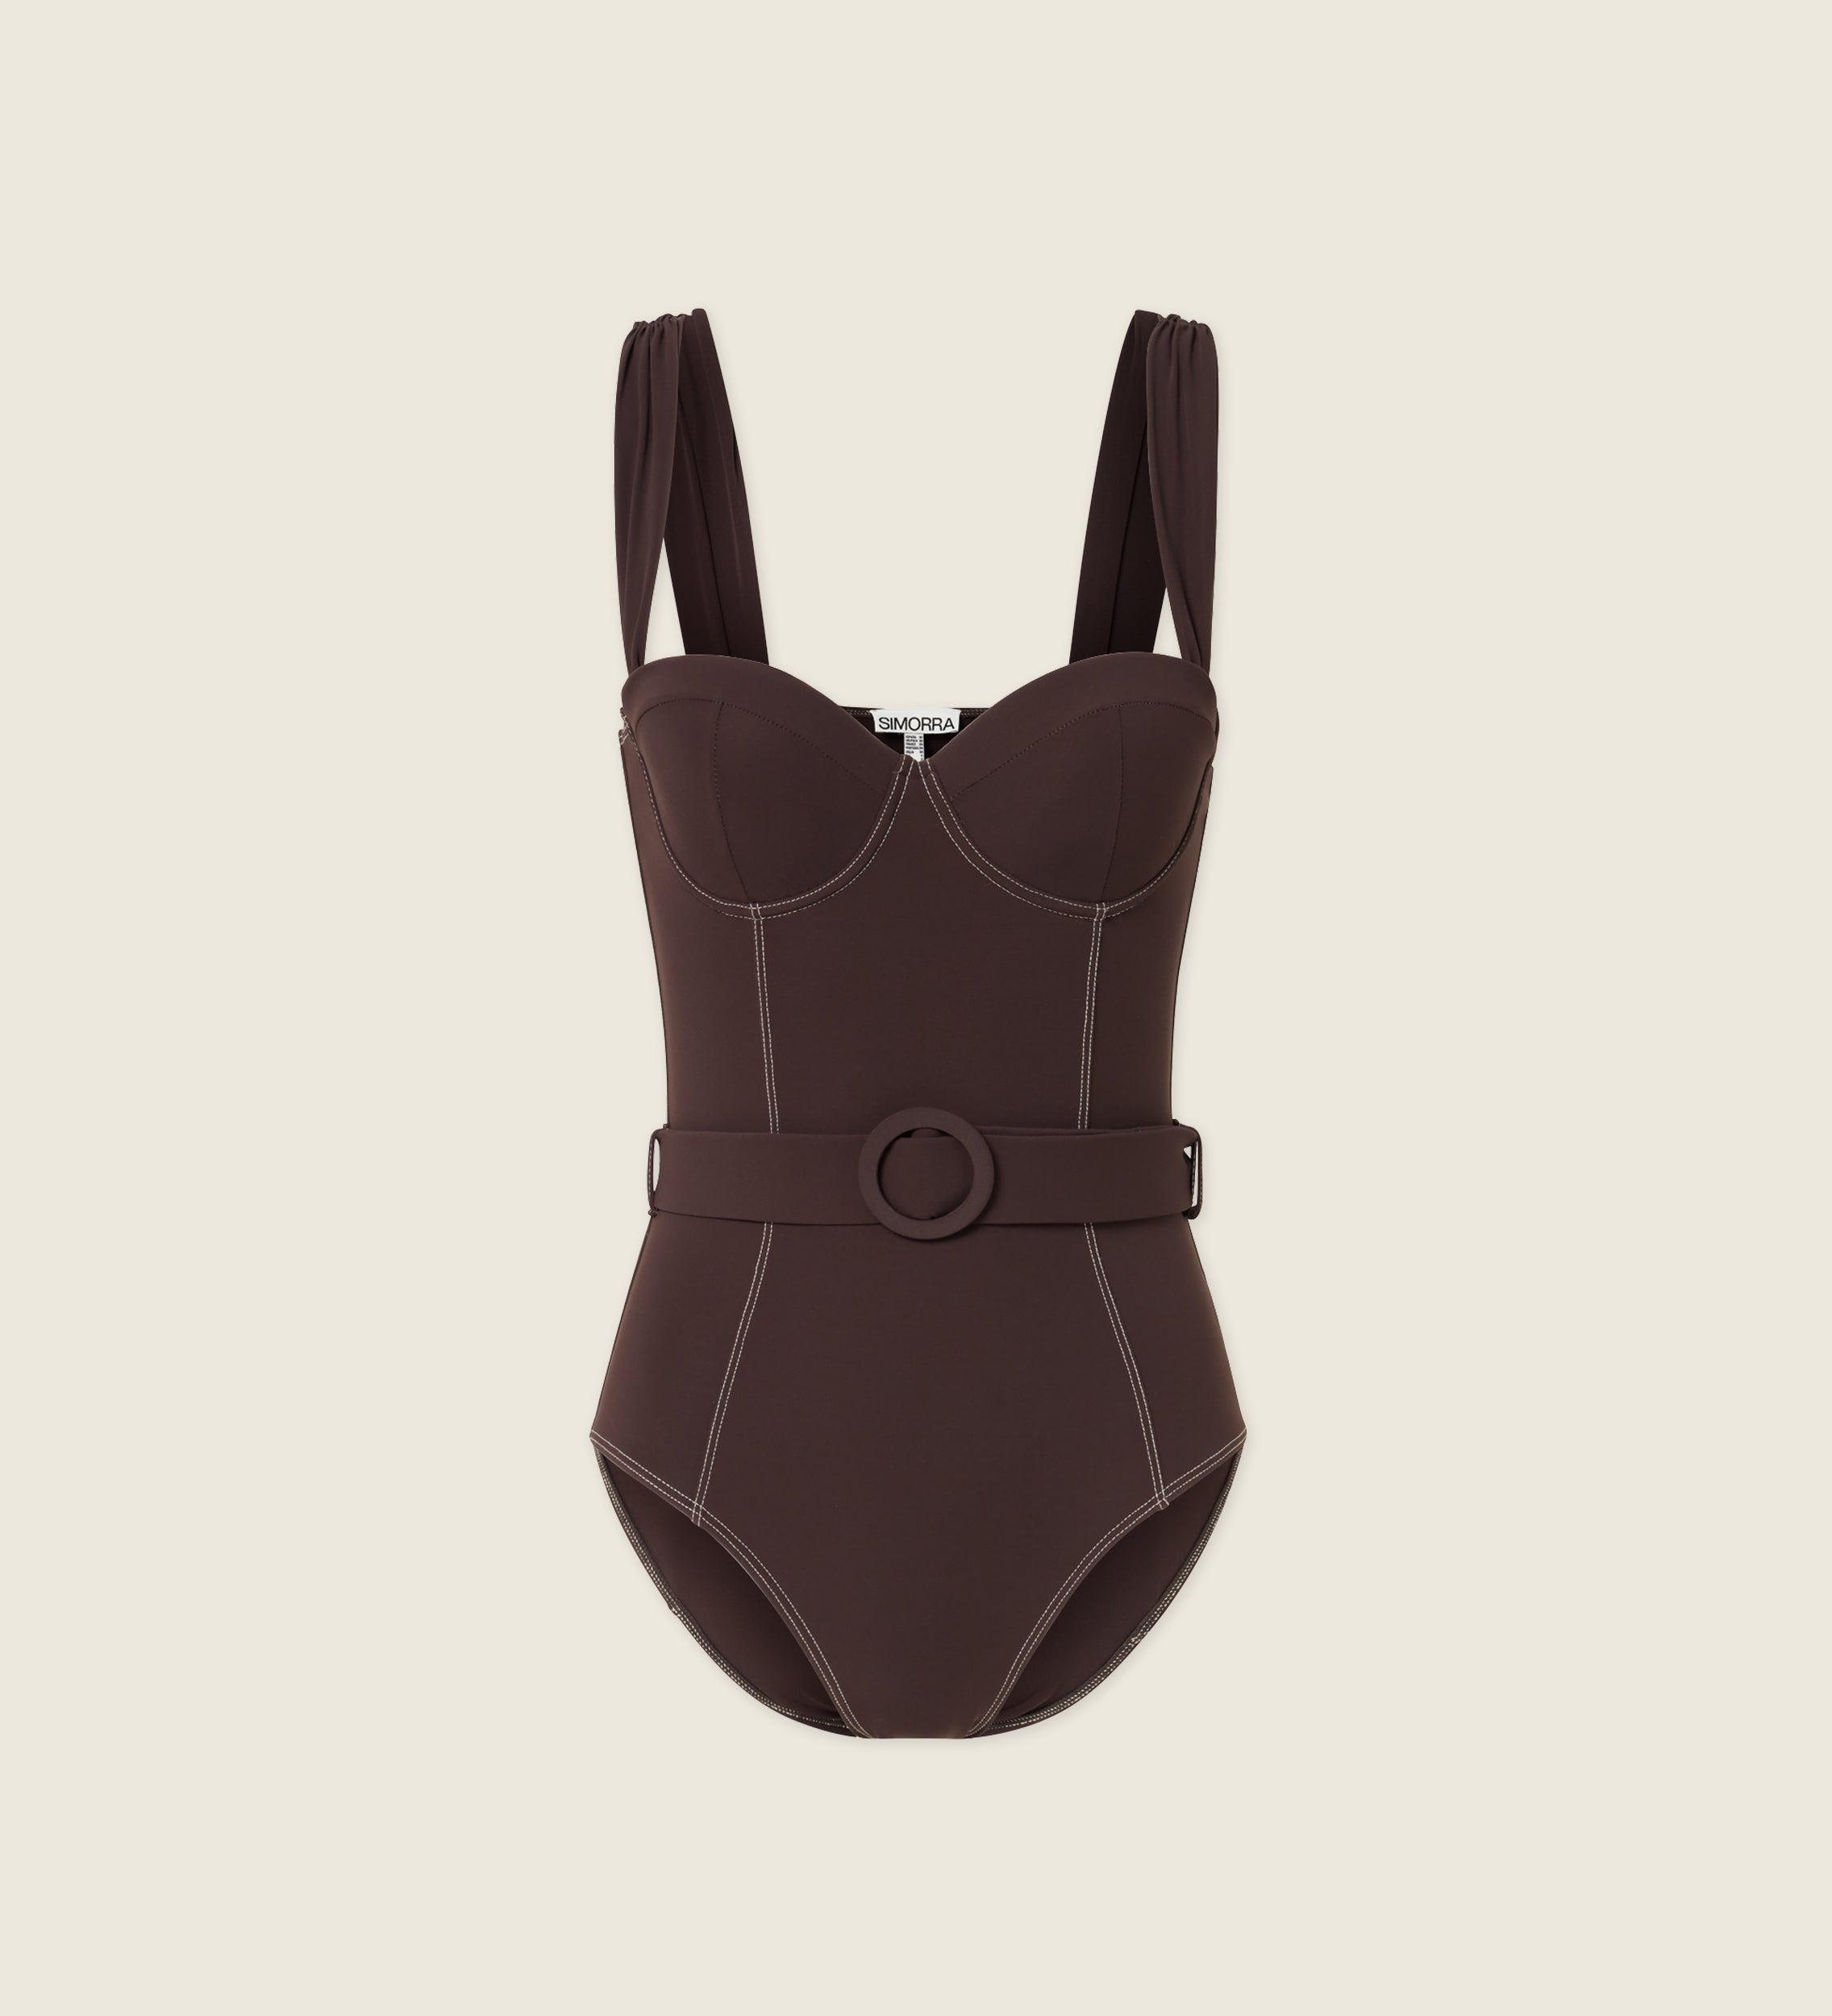 Shaped swimsuit with belt detail